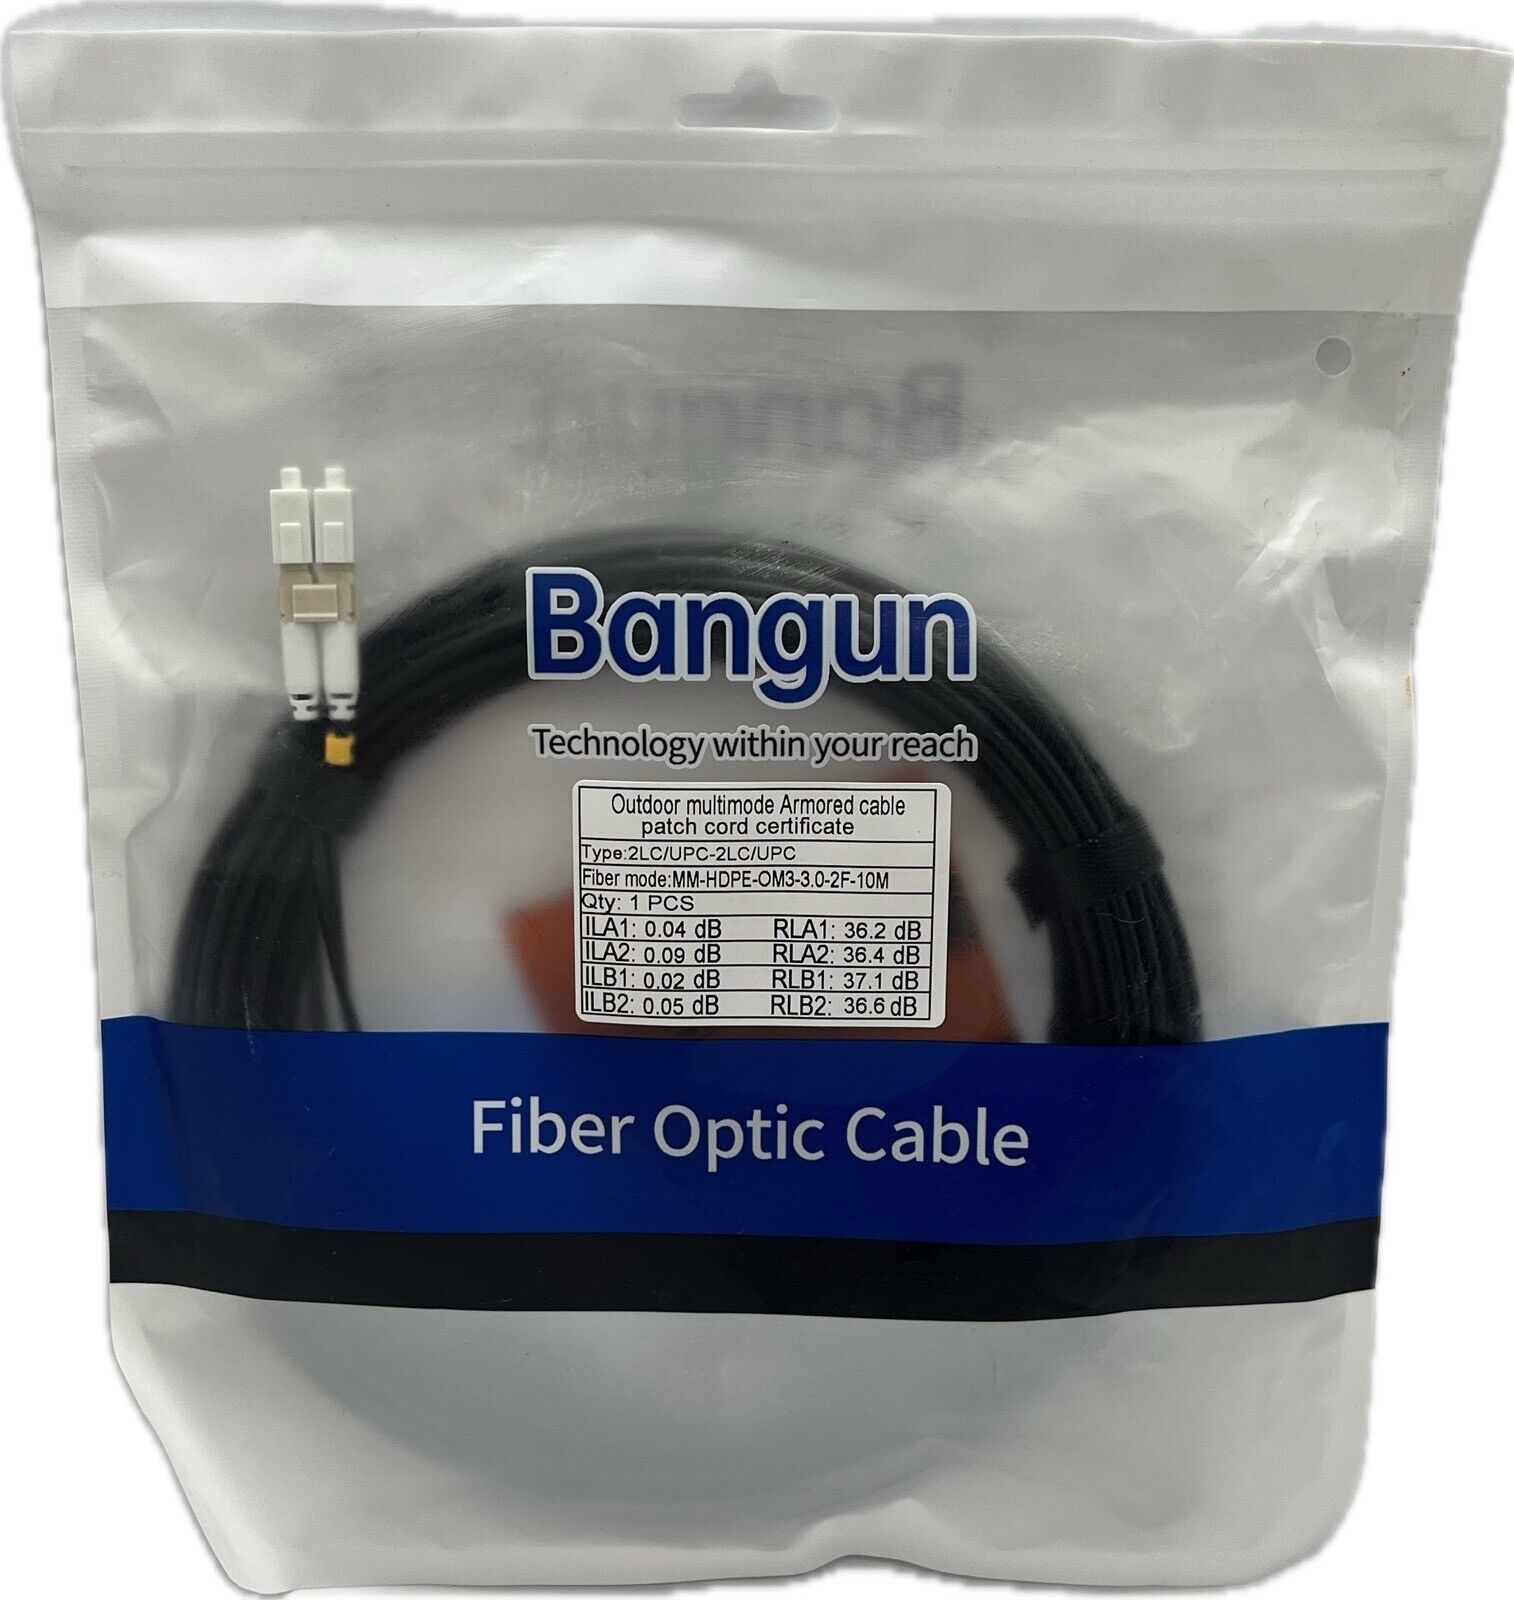 Bangun Fiber Optic Cable 30ft (10 Meters), Outdoor Multimode Armored Cable New